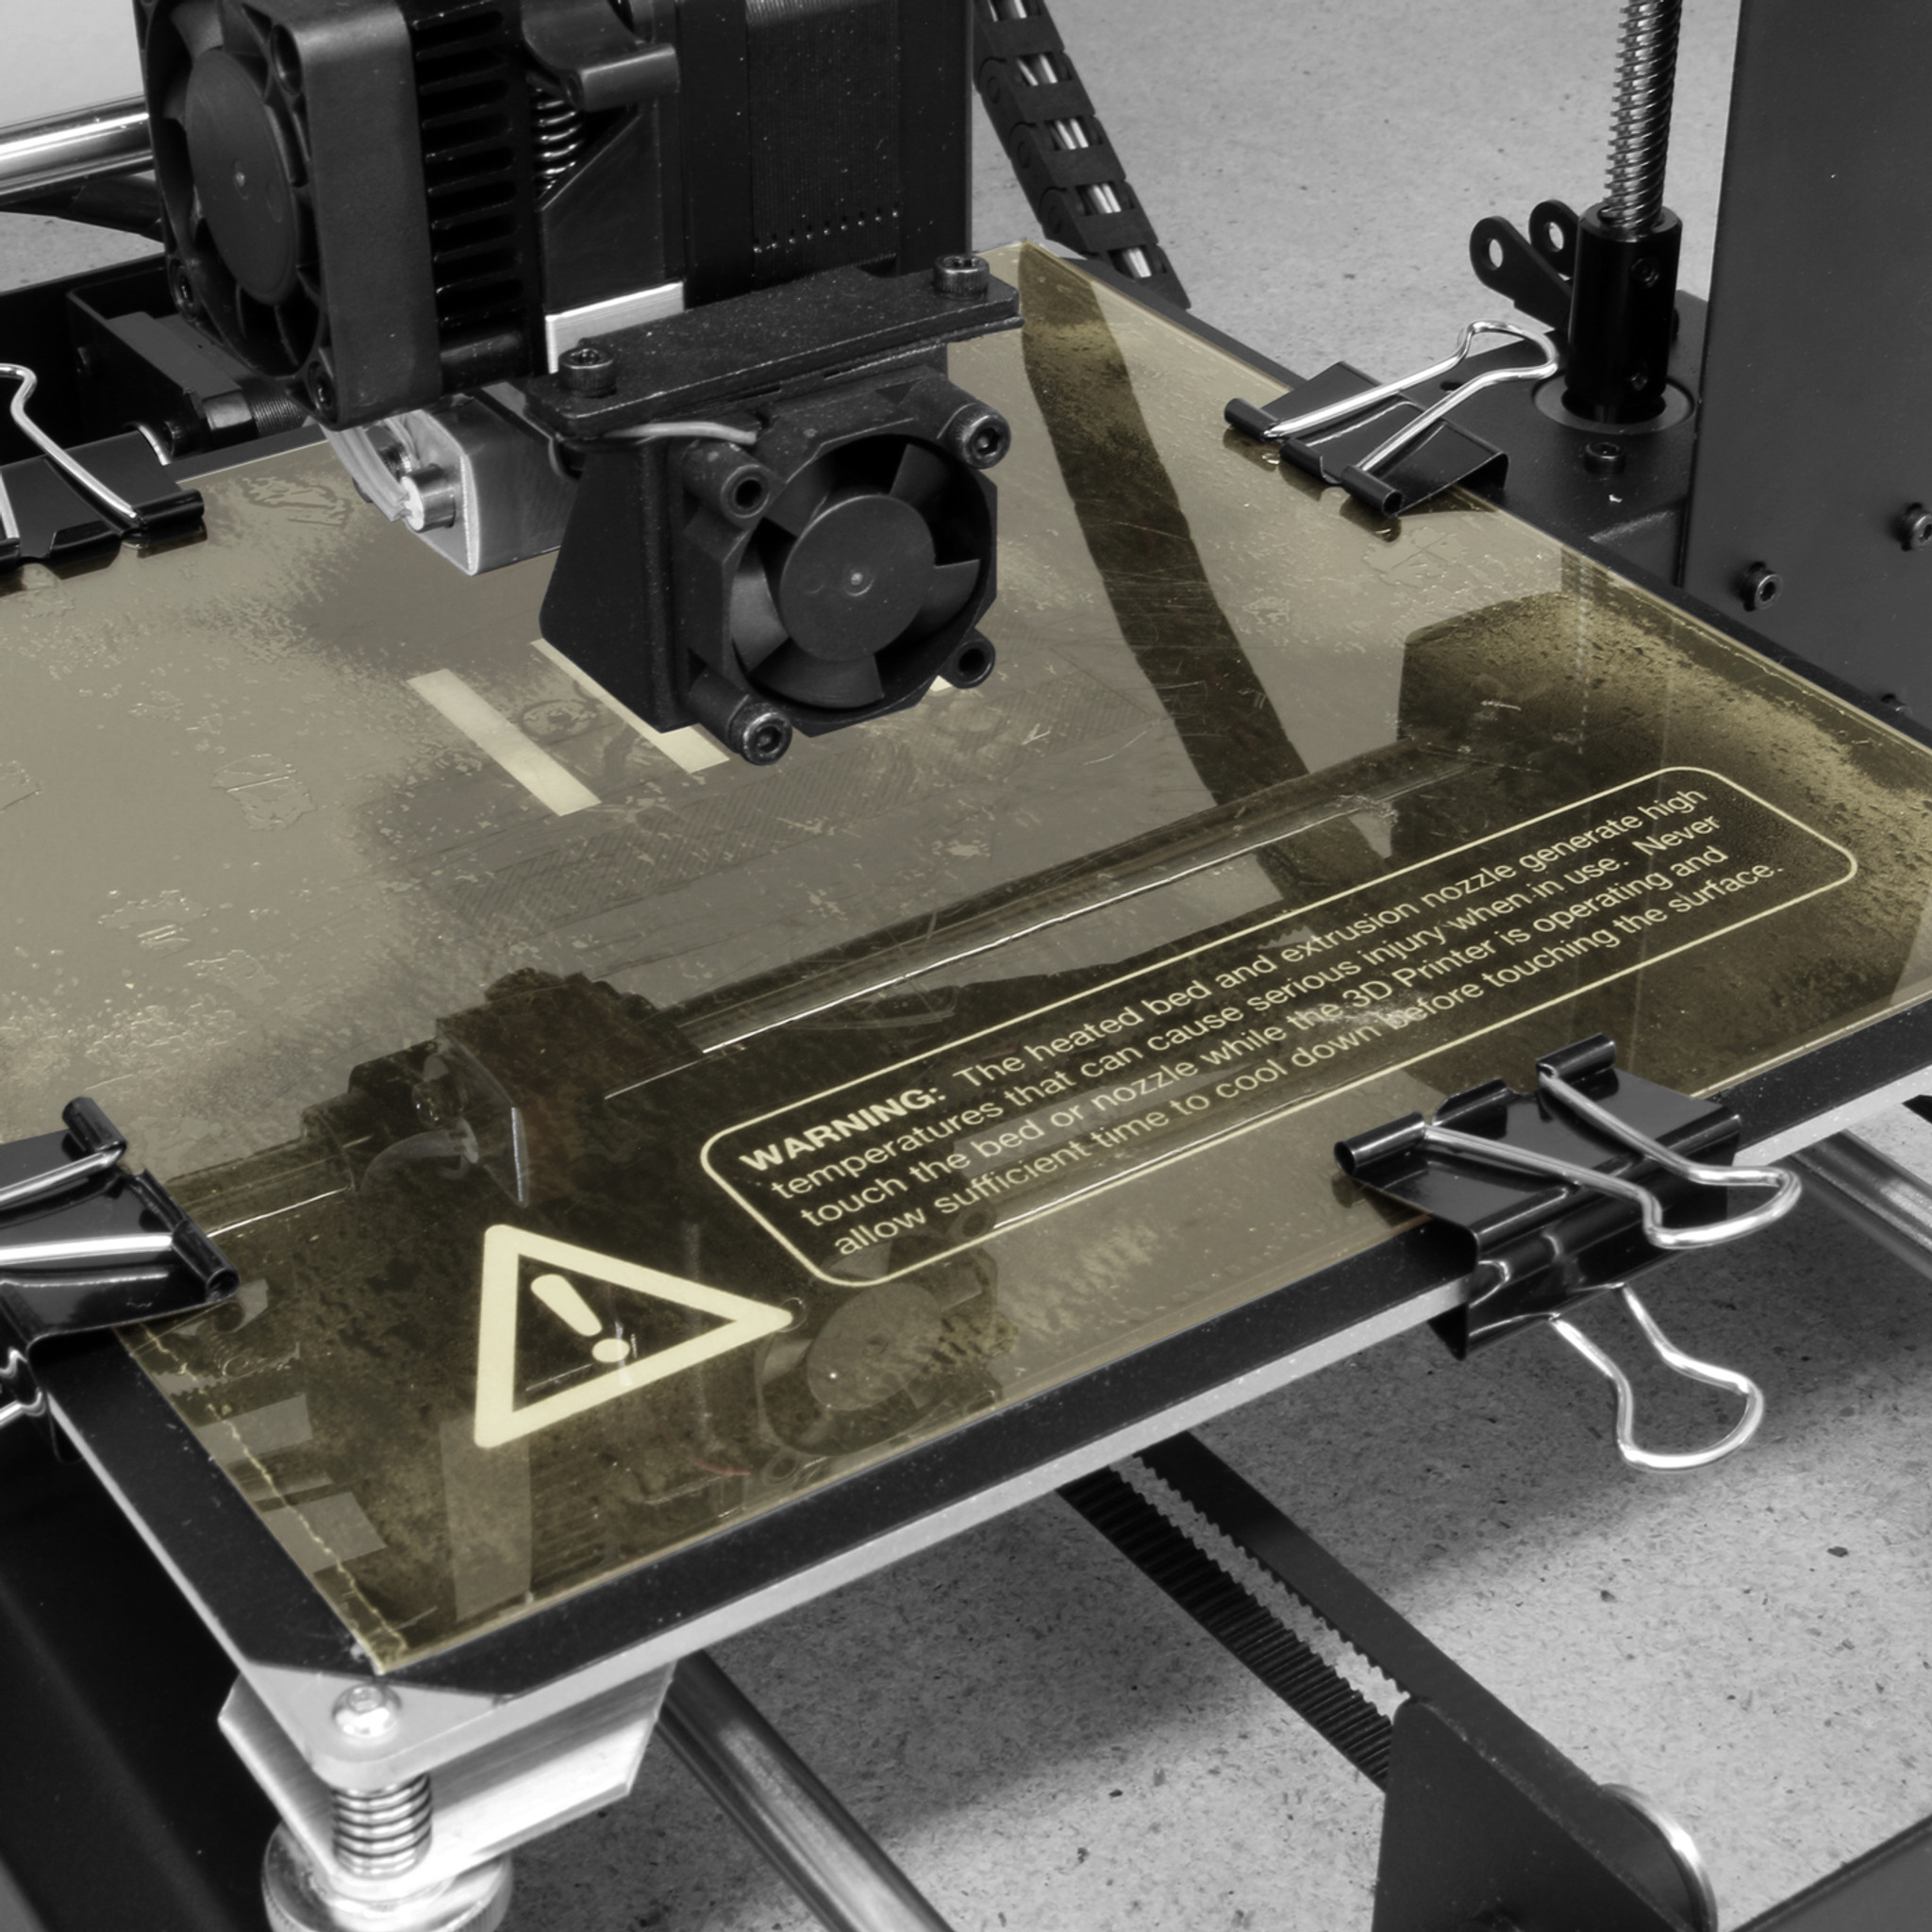 What are Bed Adhesives in 3D Printing?